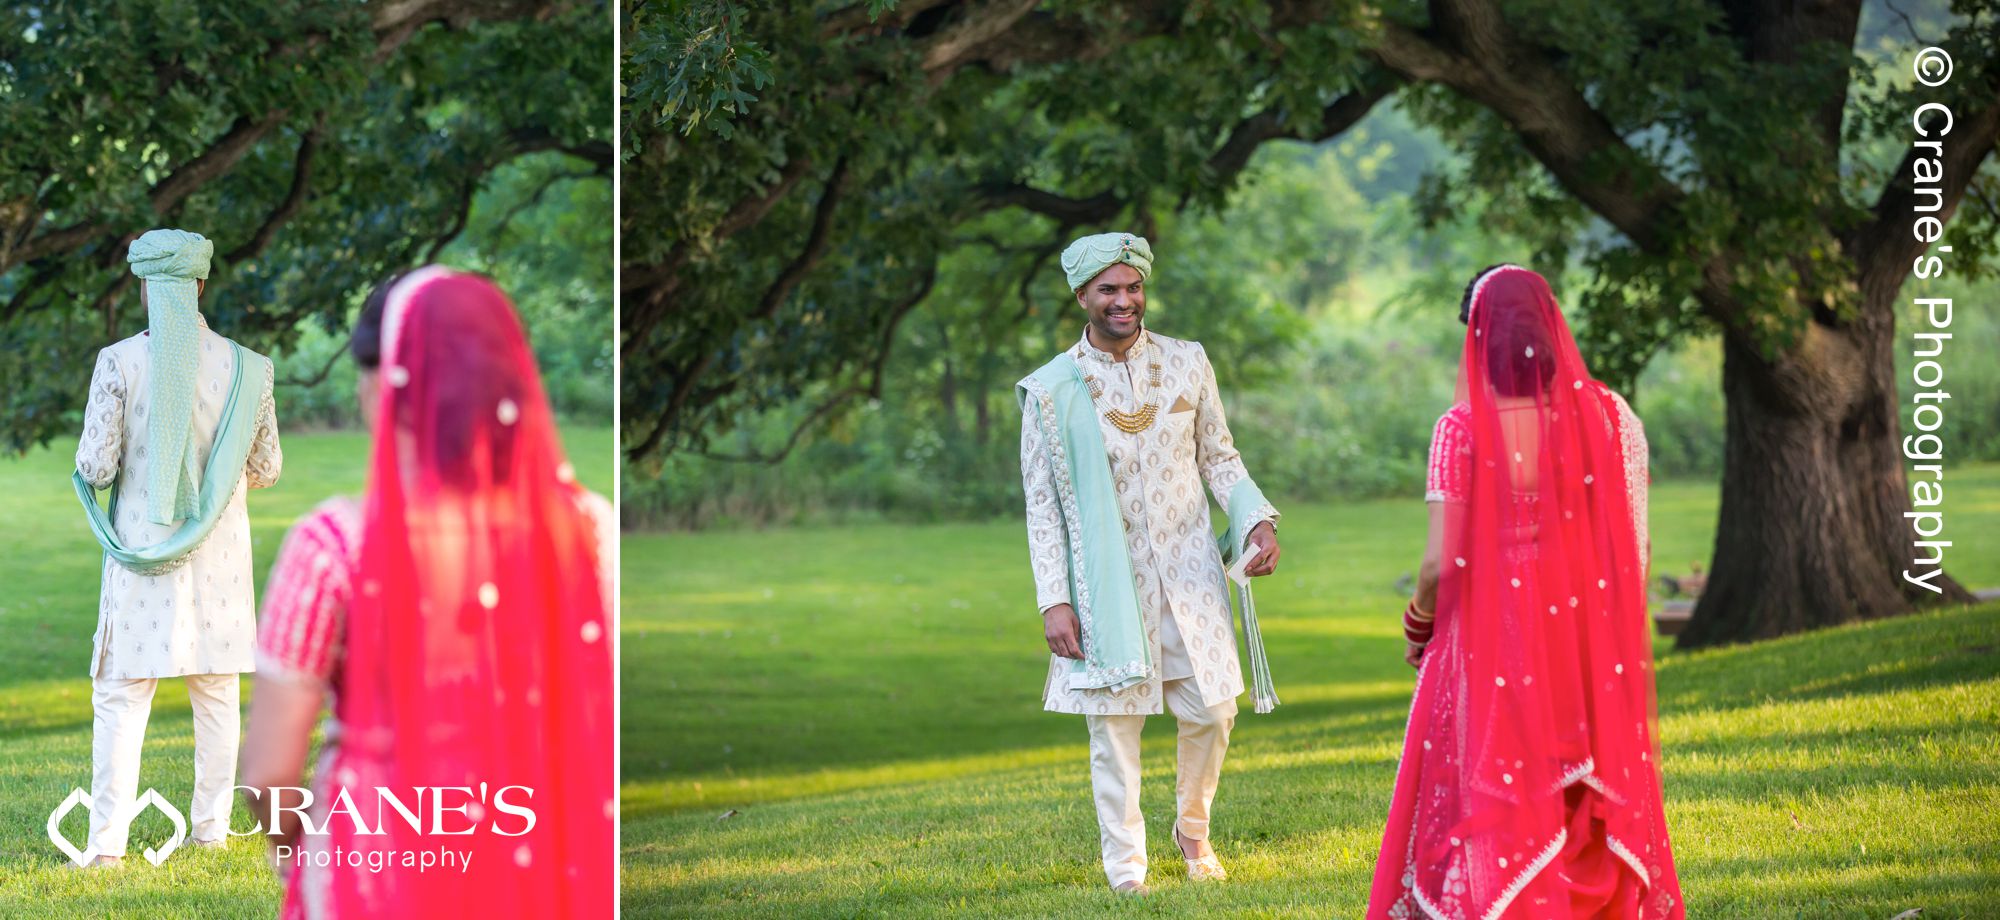 A first-look moment between an Indian bride and groom taken before their outdoor wedding ceremony